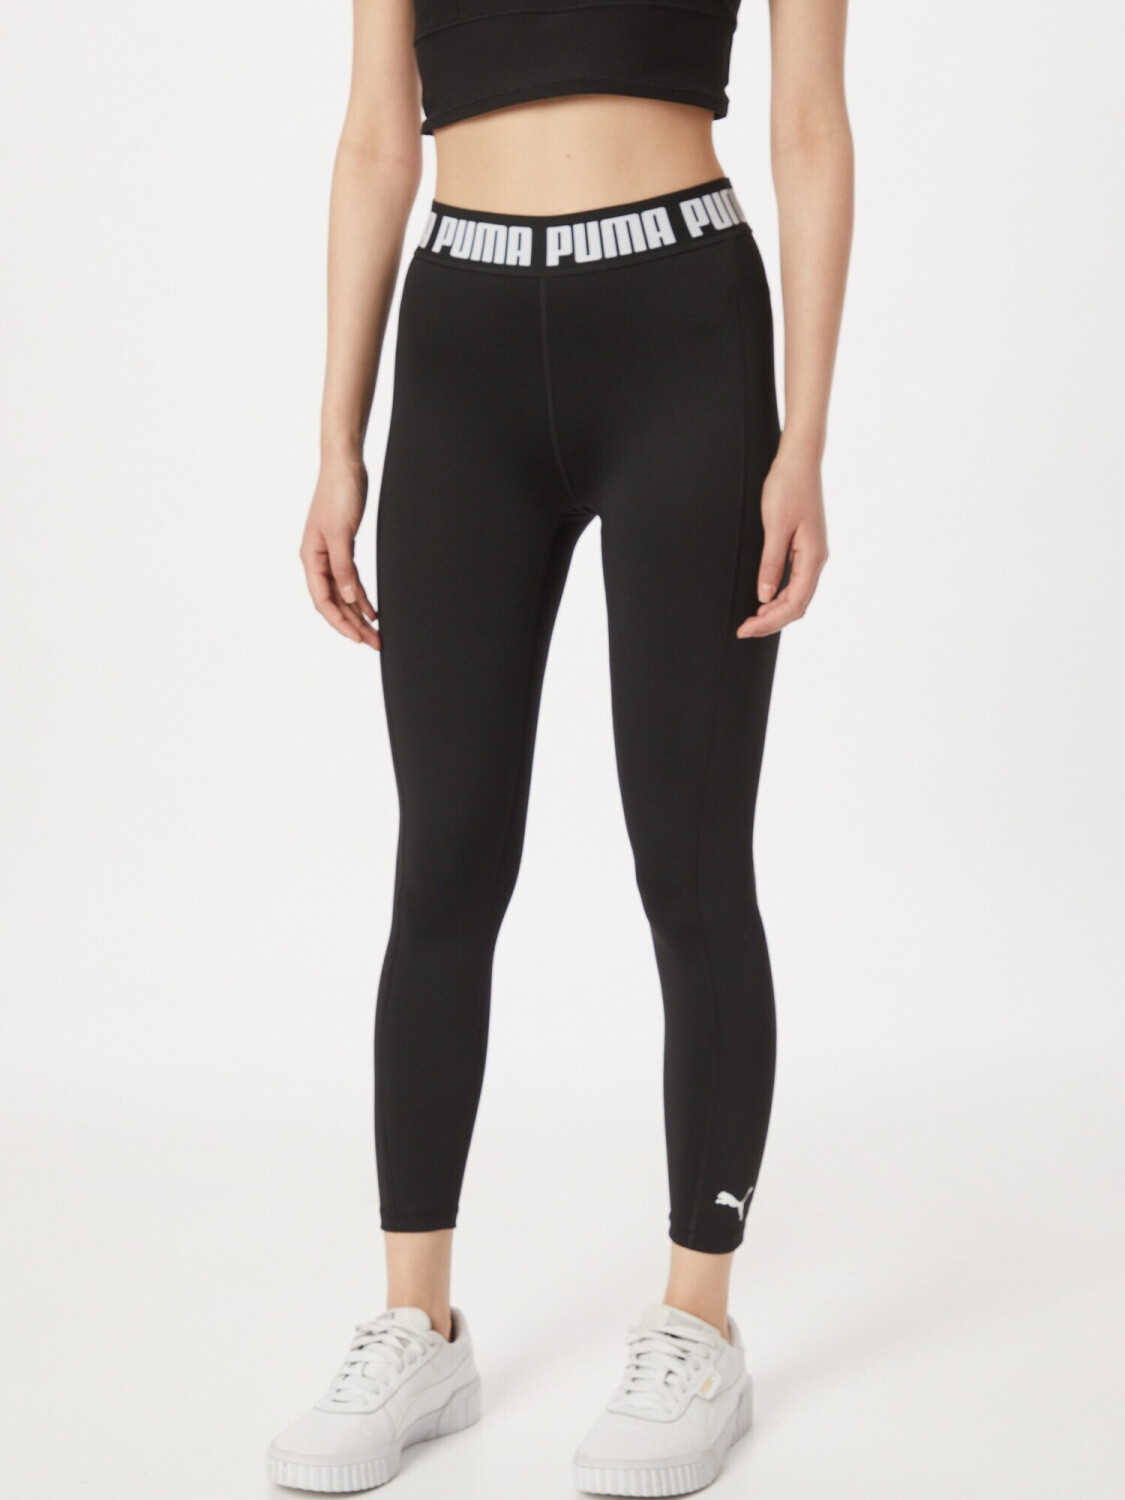 Leggings (521601) from Puma £12.00 Full Waist black Buy on Deals Best Strong (Today) – puma High